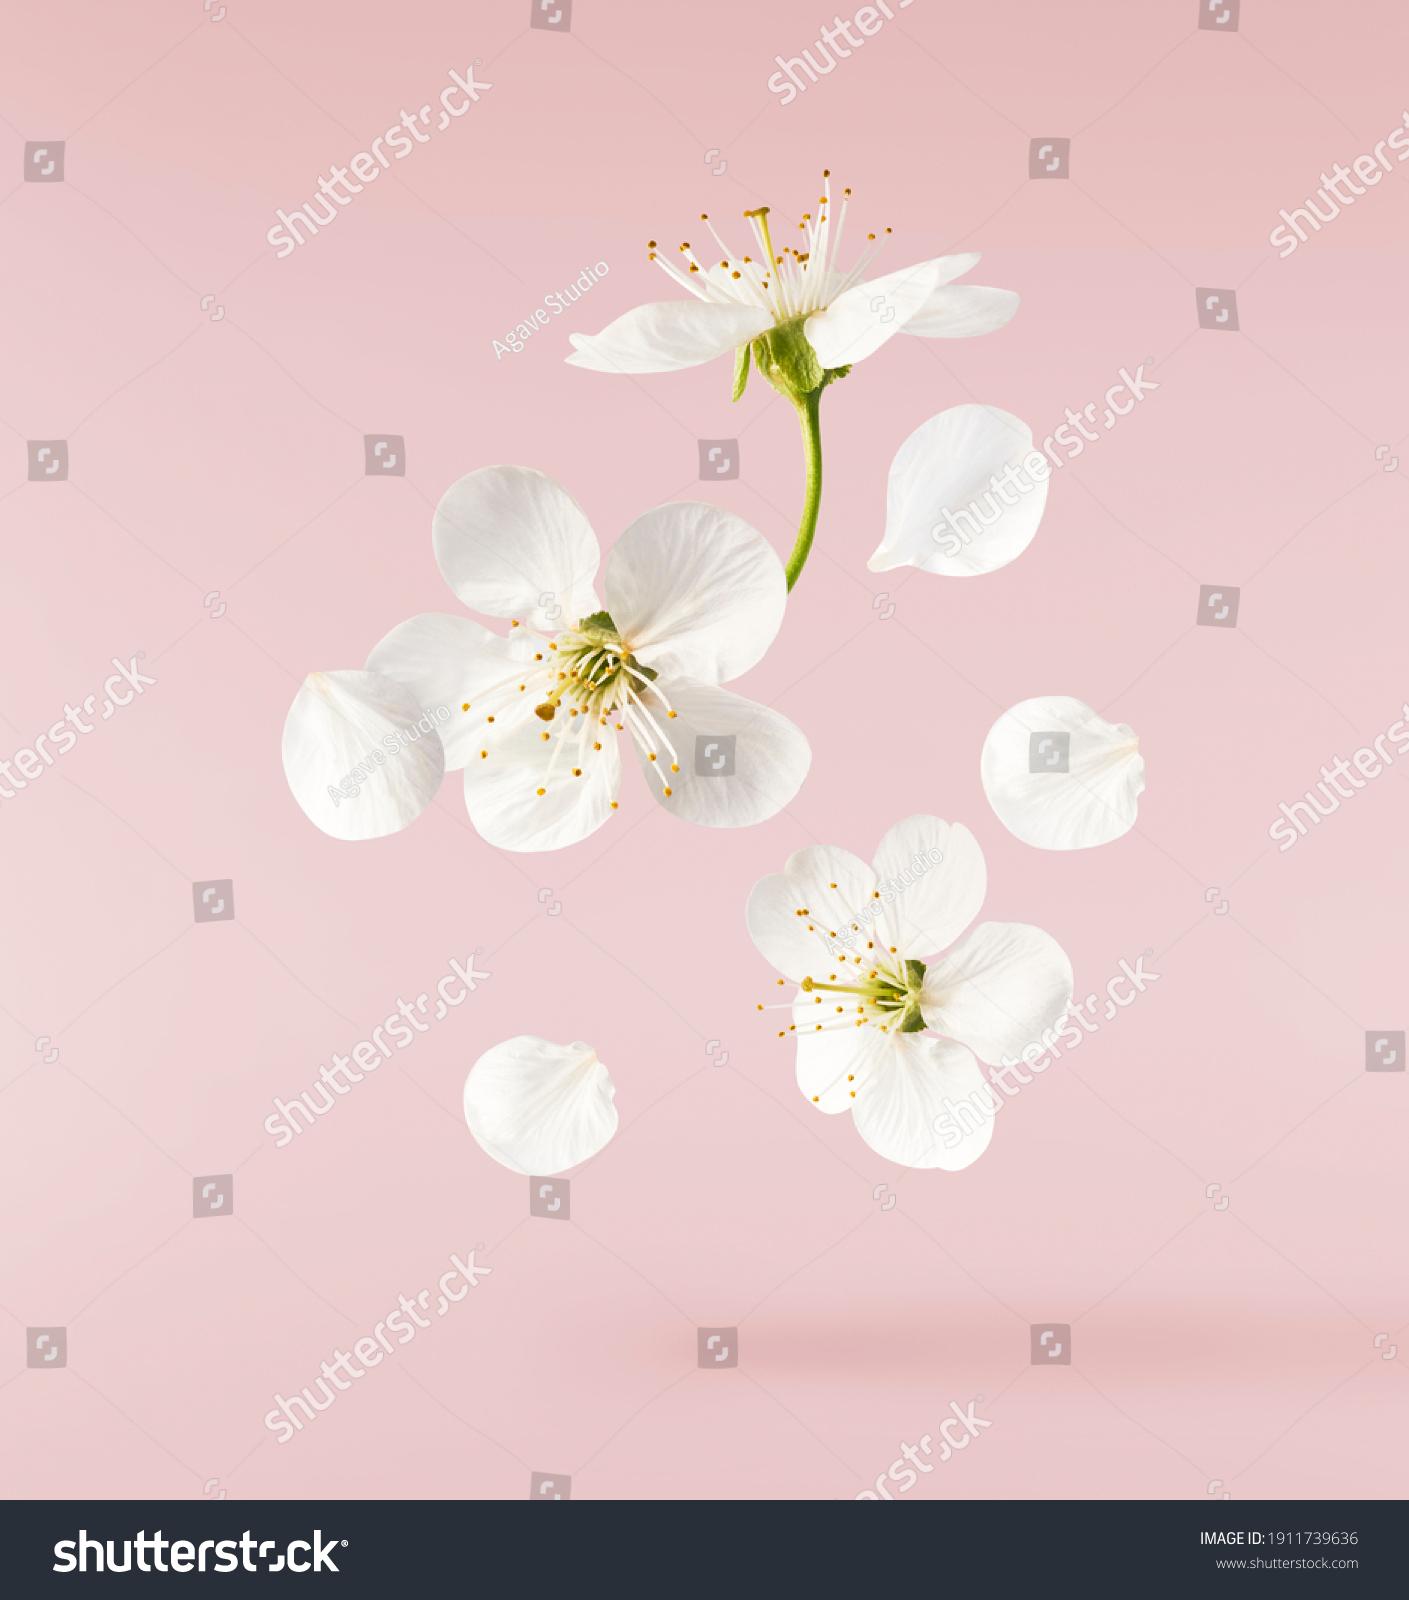 A beautiful image of spring white cherry flowers flying in the air on the pastel pink background. Levitation conception. High resolution image #1911739636